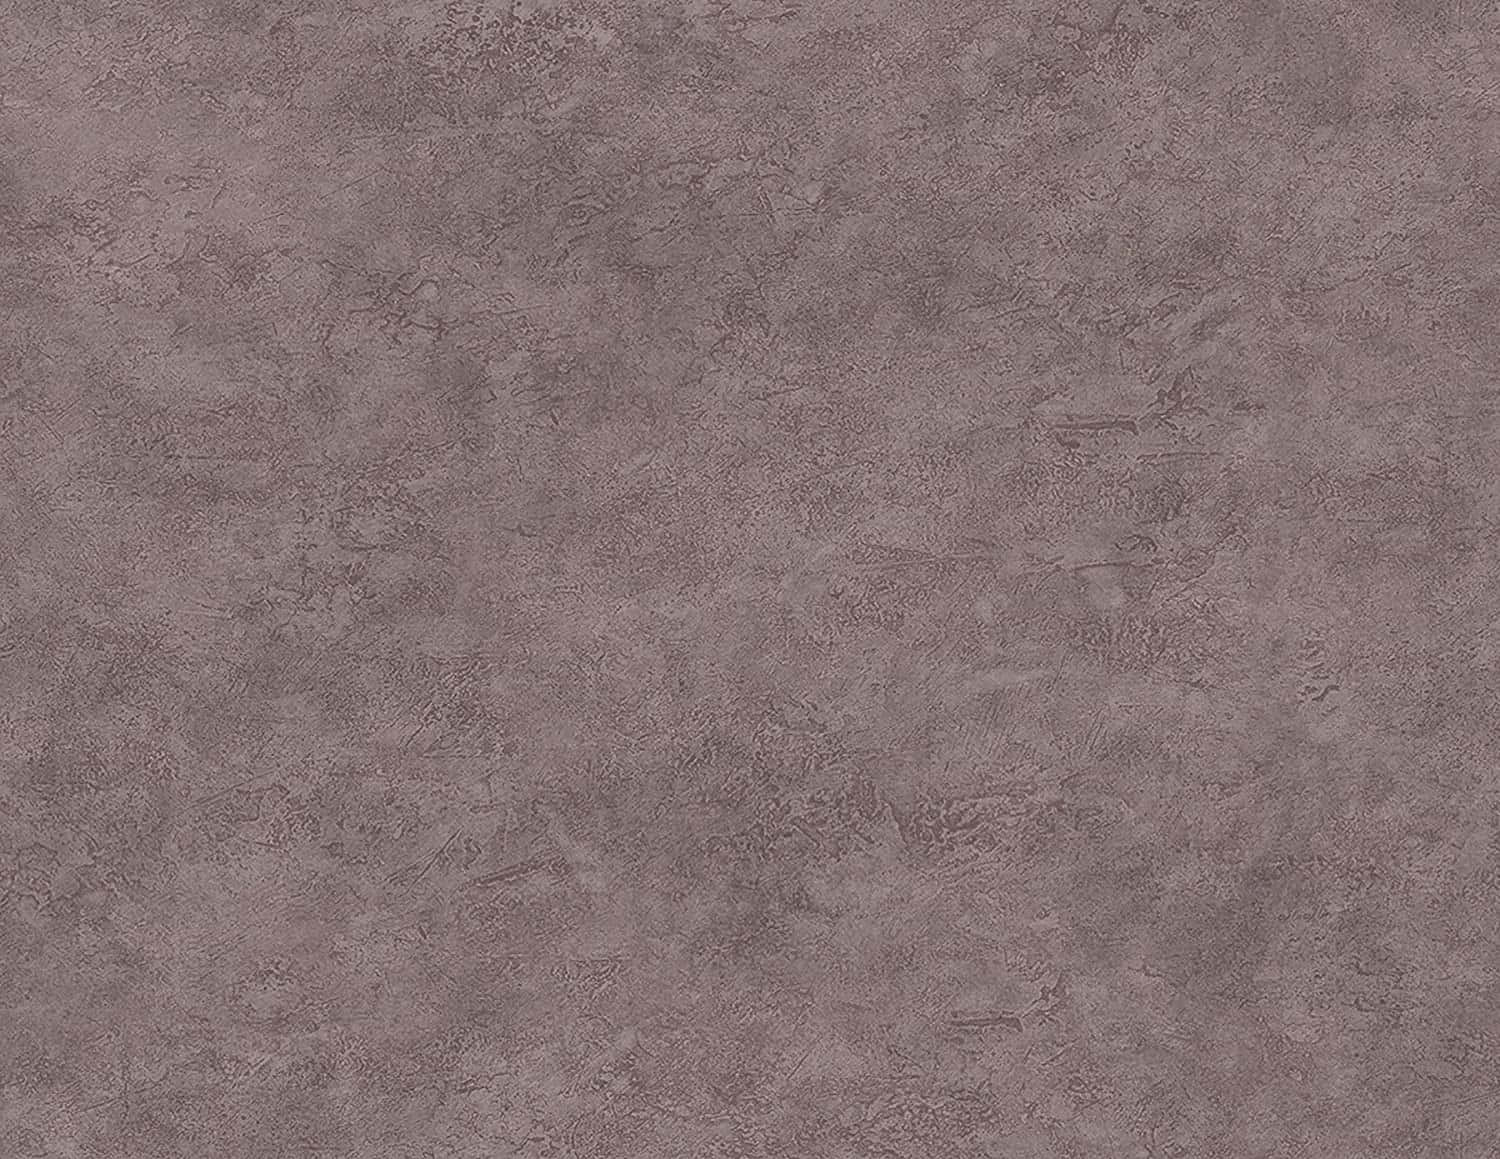 'Close Up View of Marble Texture Background'